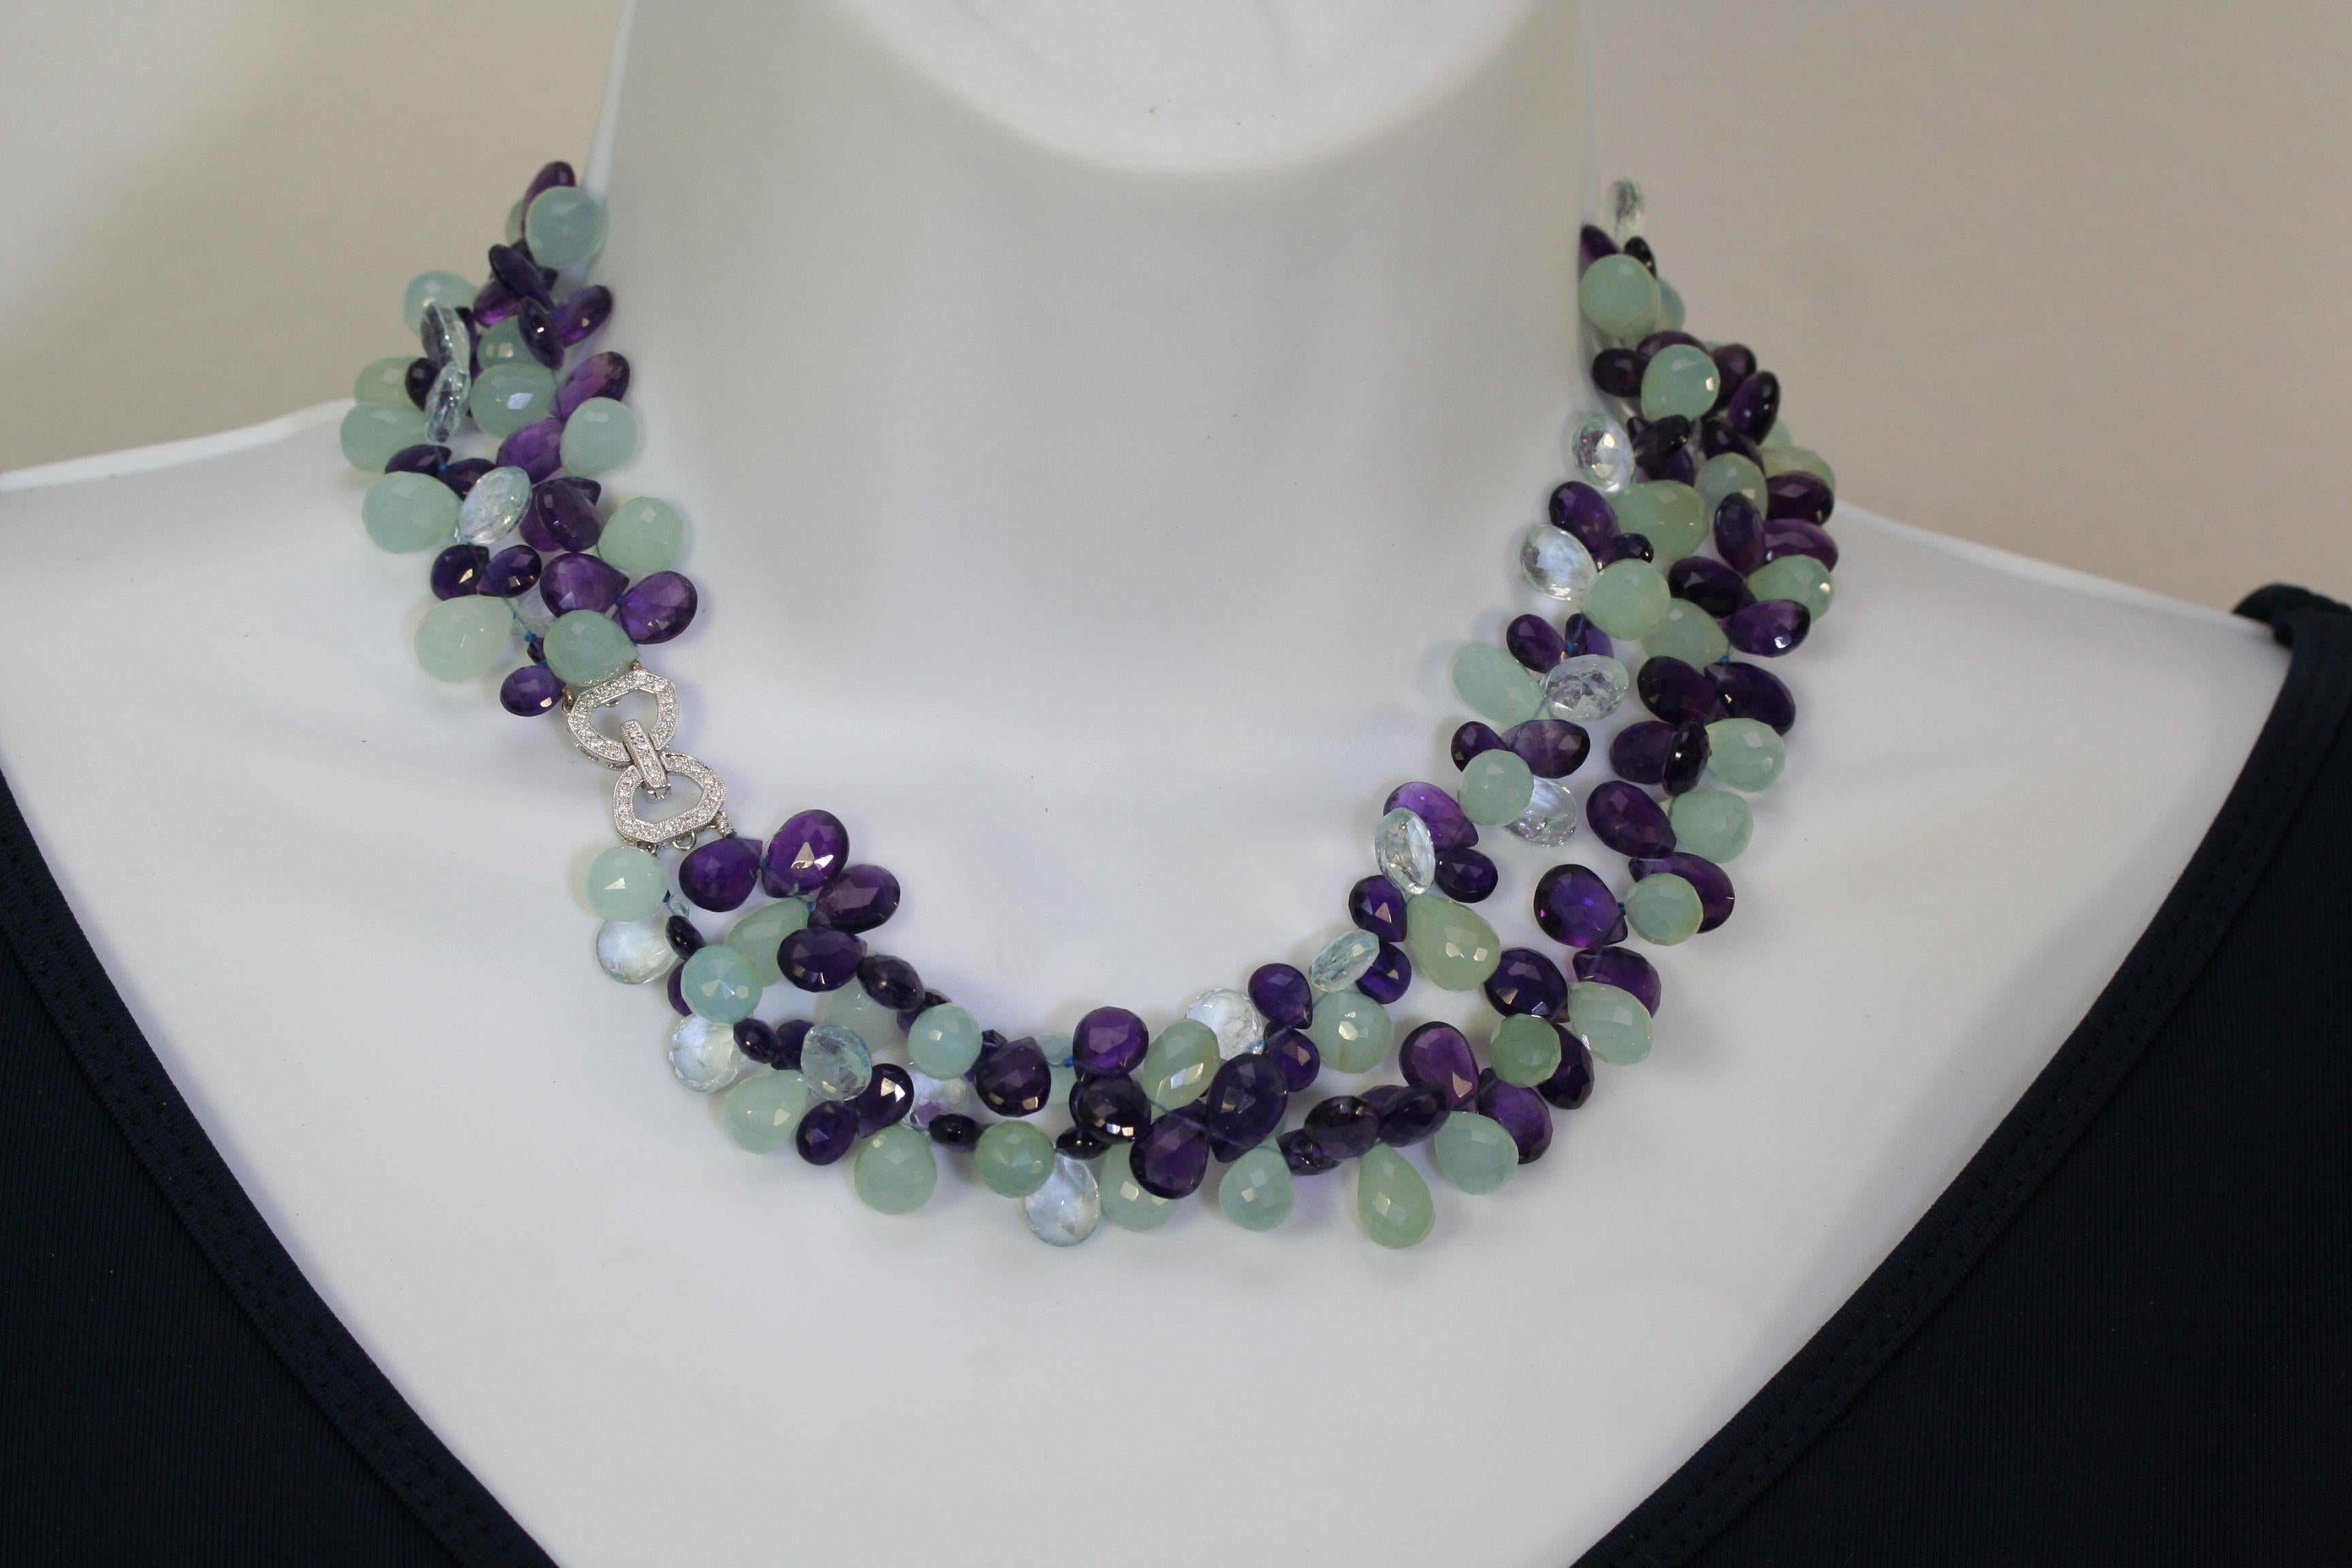 Exquisite two-strand necklace of blues to purple faceted semi-precious stones secured with an 18k white gold clasp paveed with diamonds. This beauty speaks for itself.  The color combination is outstanding and the quality will take its place among